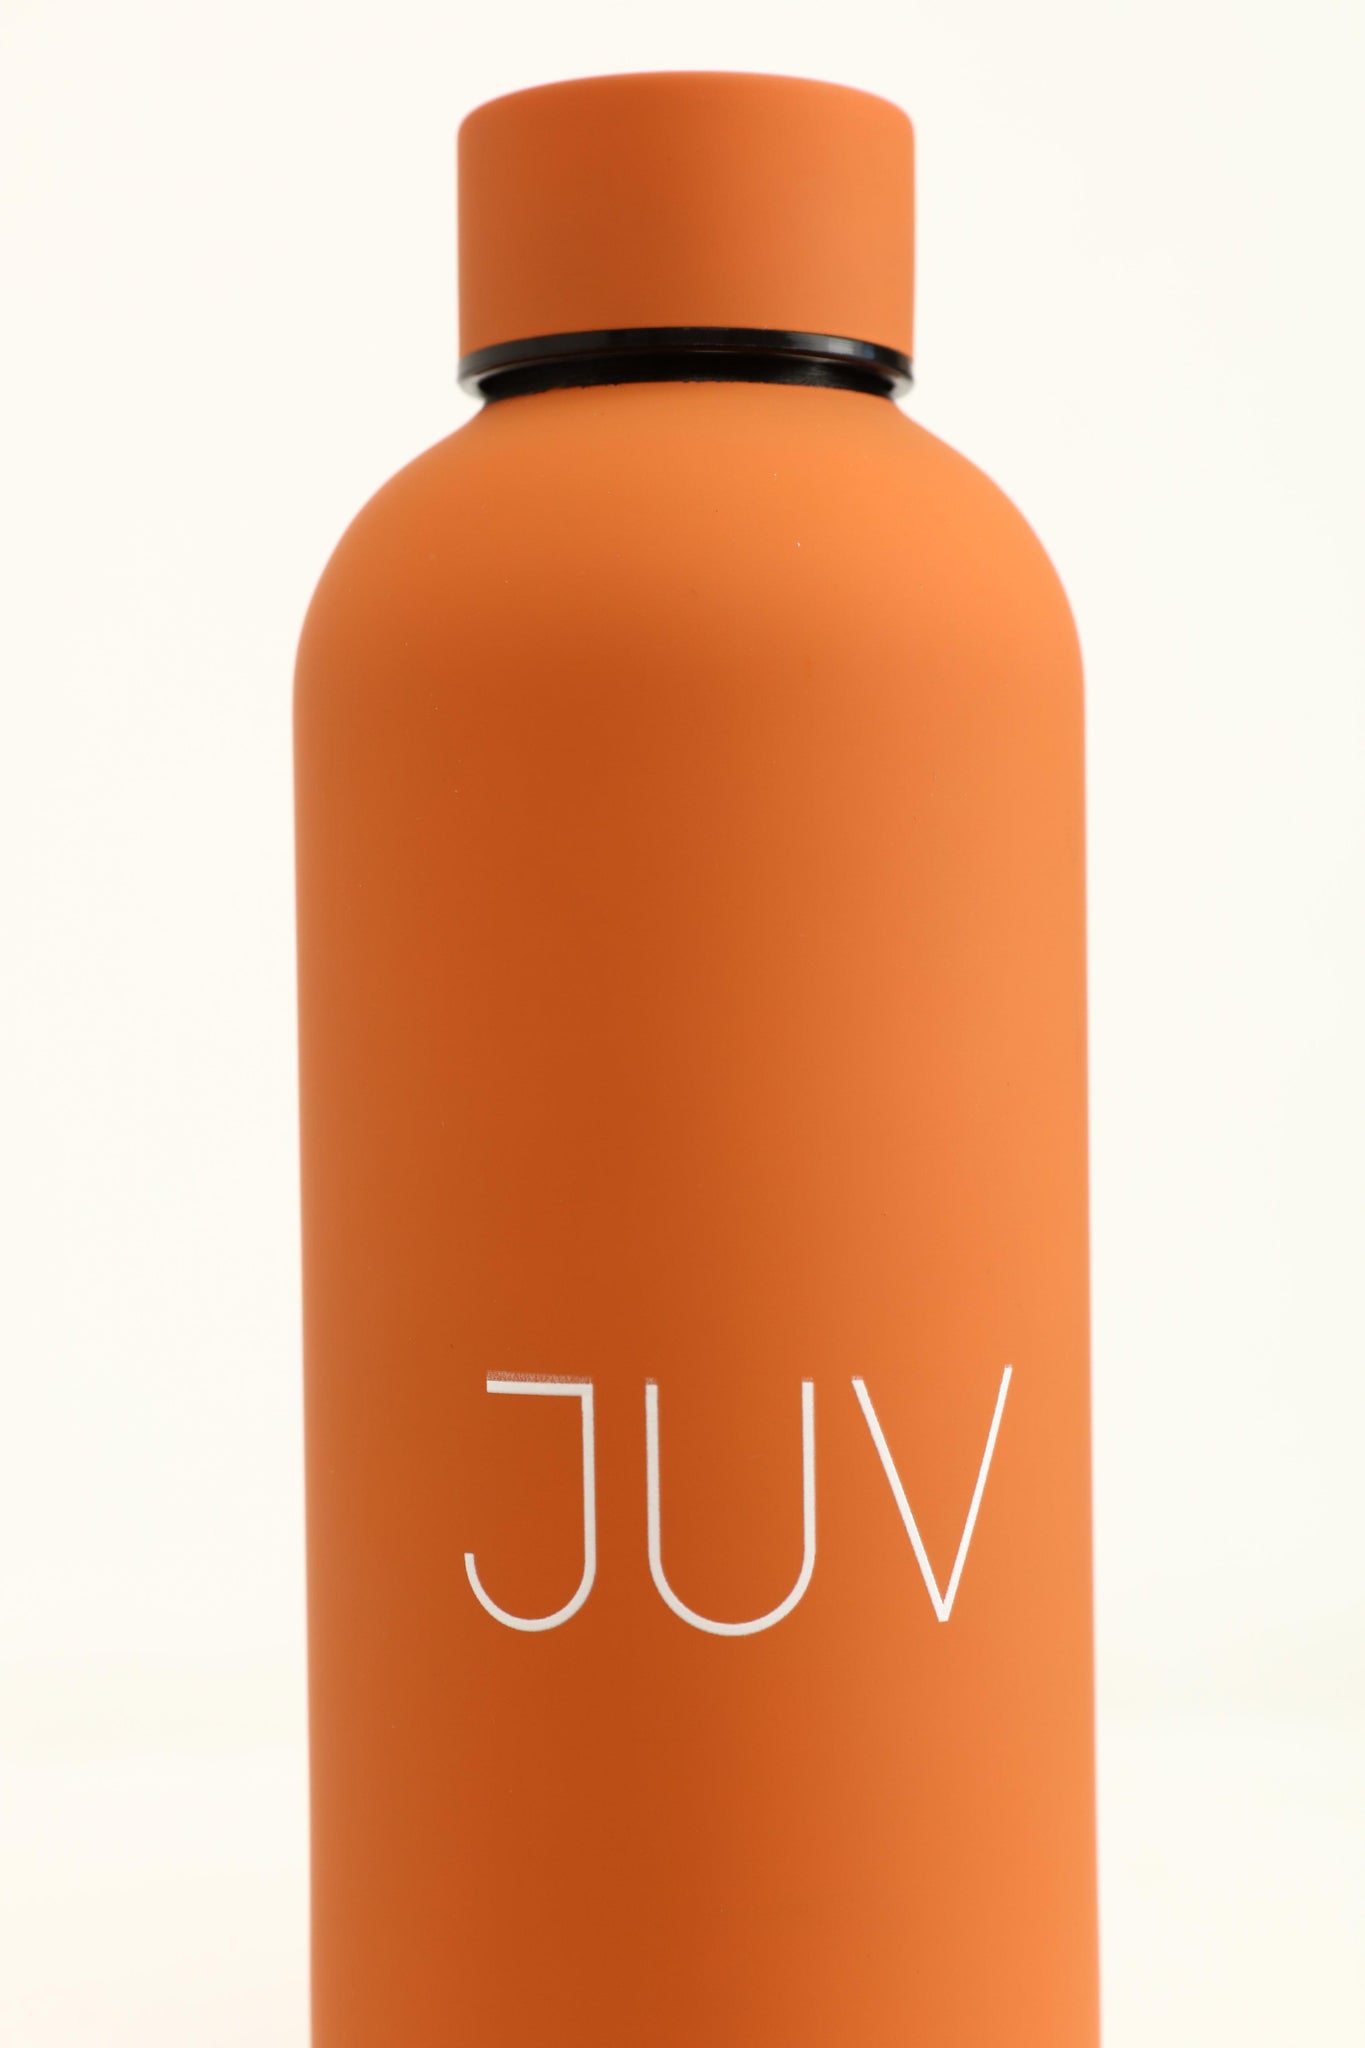 JUV mia thermal bottle in orange, close up front view.